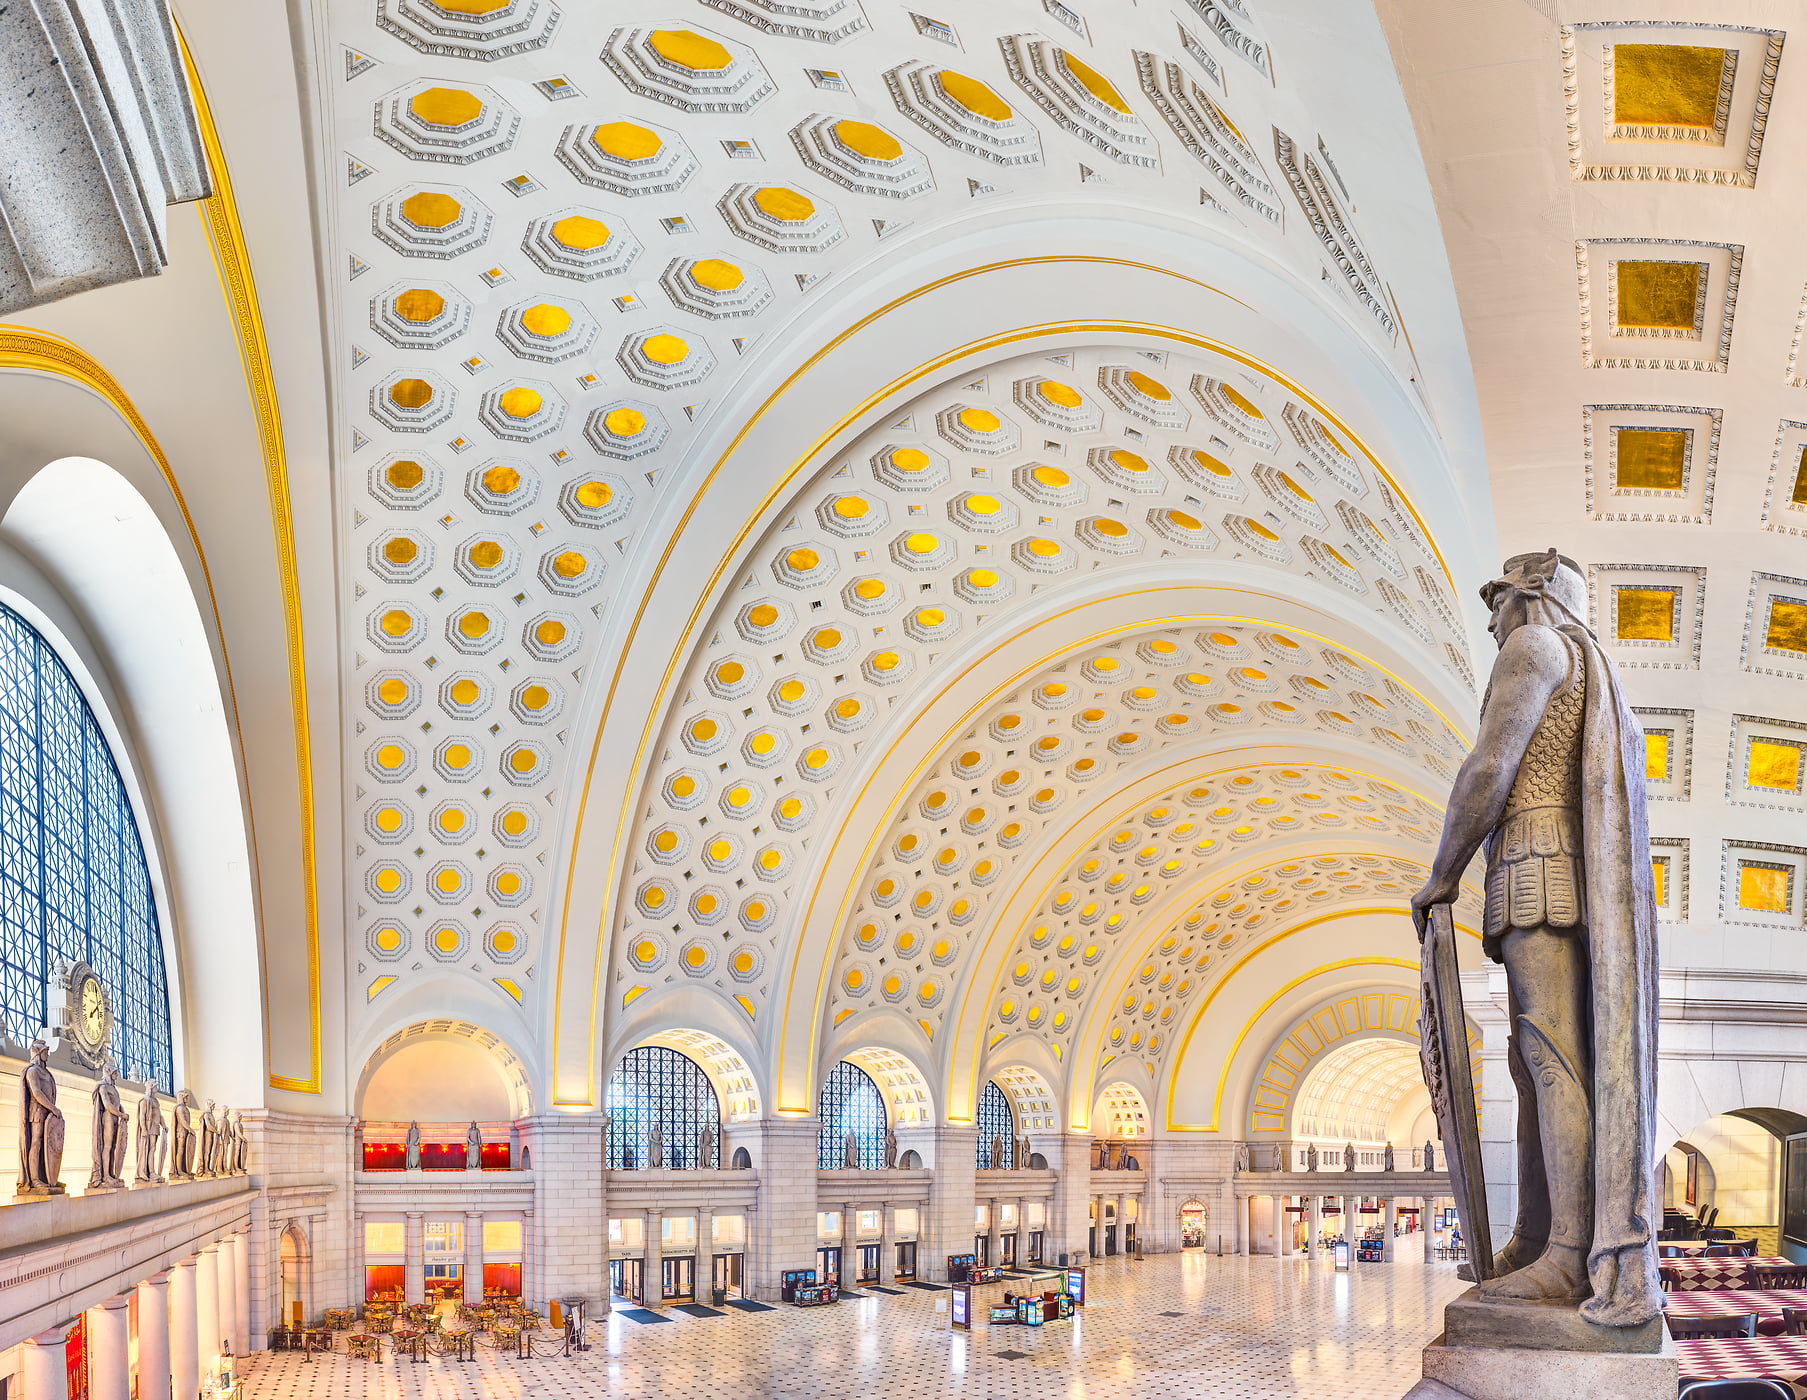 2,128 megapixels! A very high resolution, large-format VAST photo print of Washington DC architecture; interior photograph created by Tim Lo Monaco in Main Hall at Union Station, Washington, D.C.